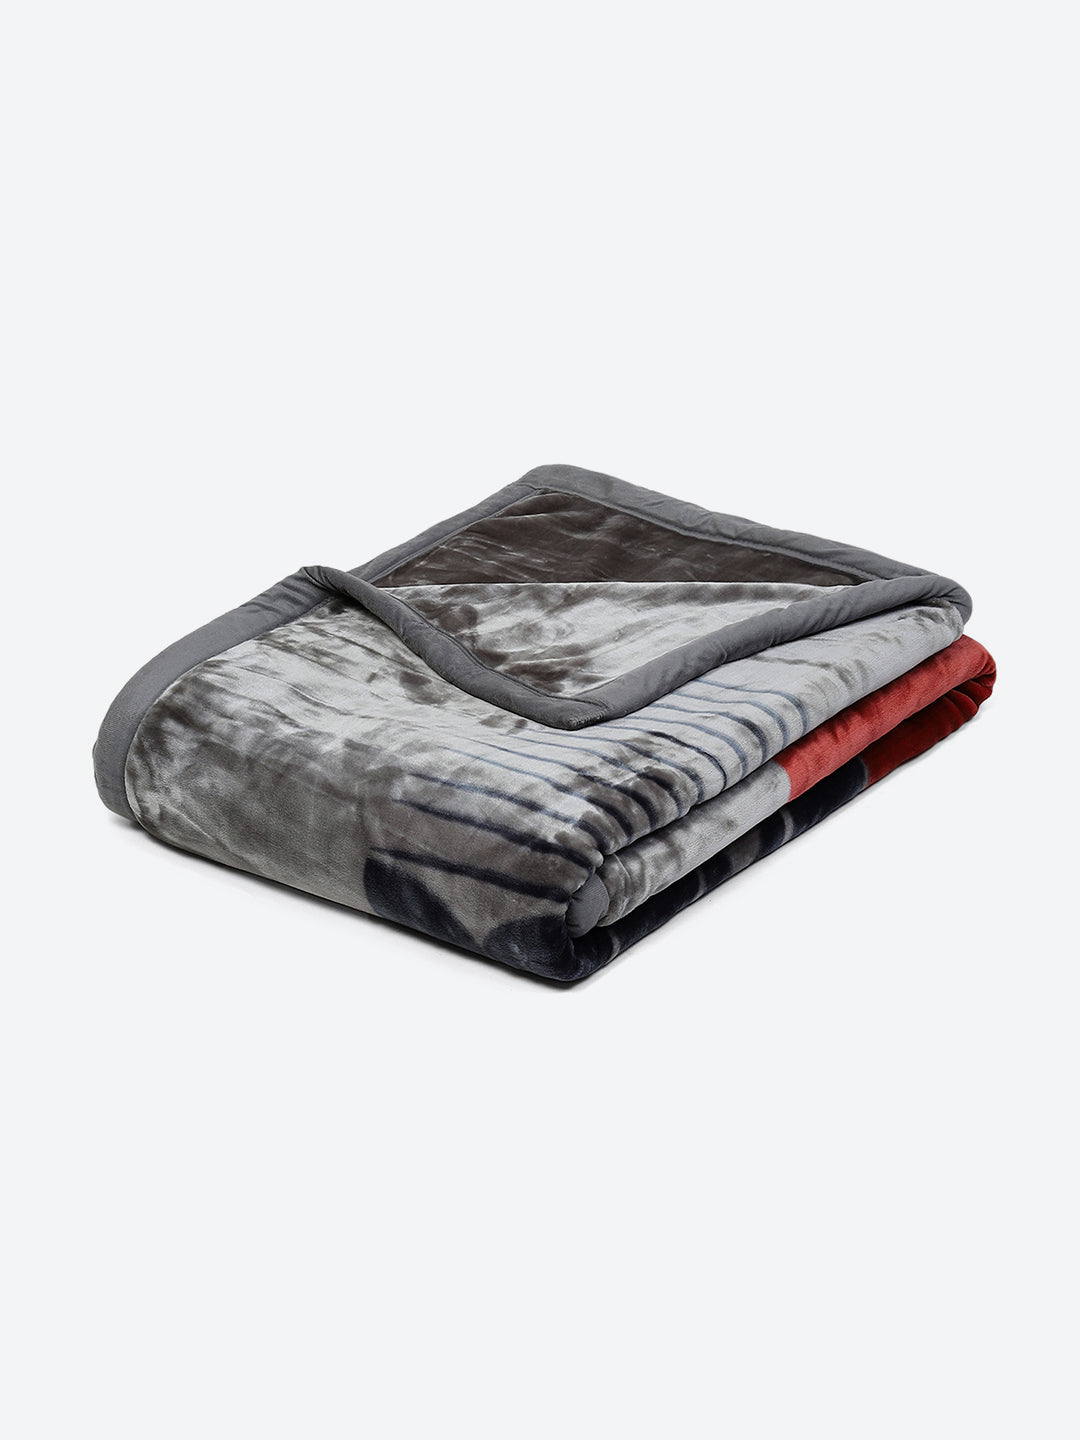 Printed Double Bed Blanket for Mild Winter -2 Ply